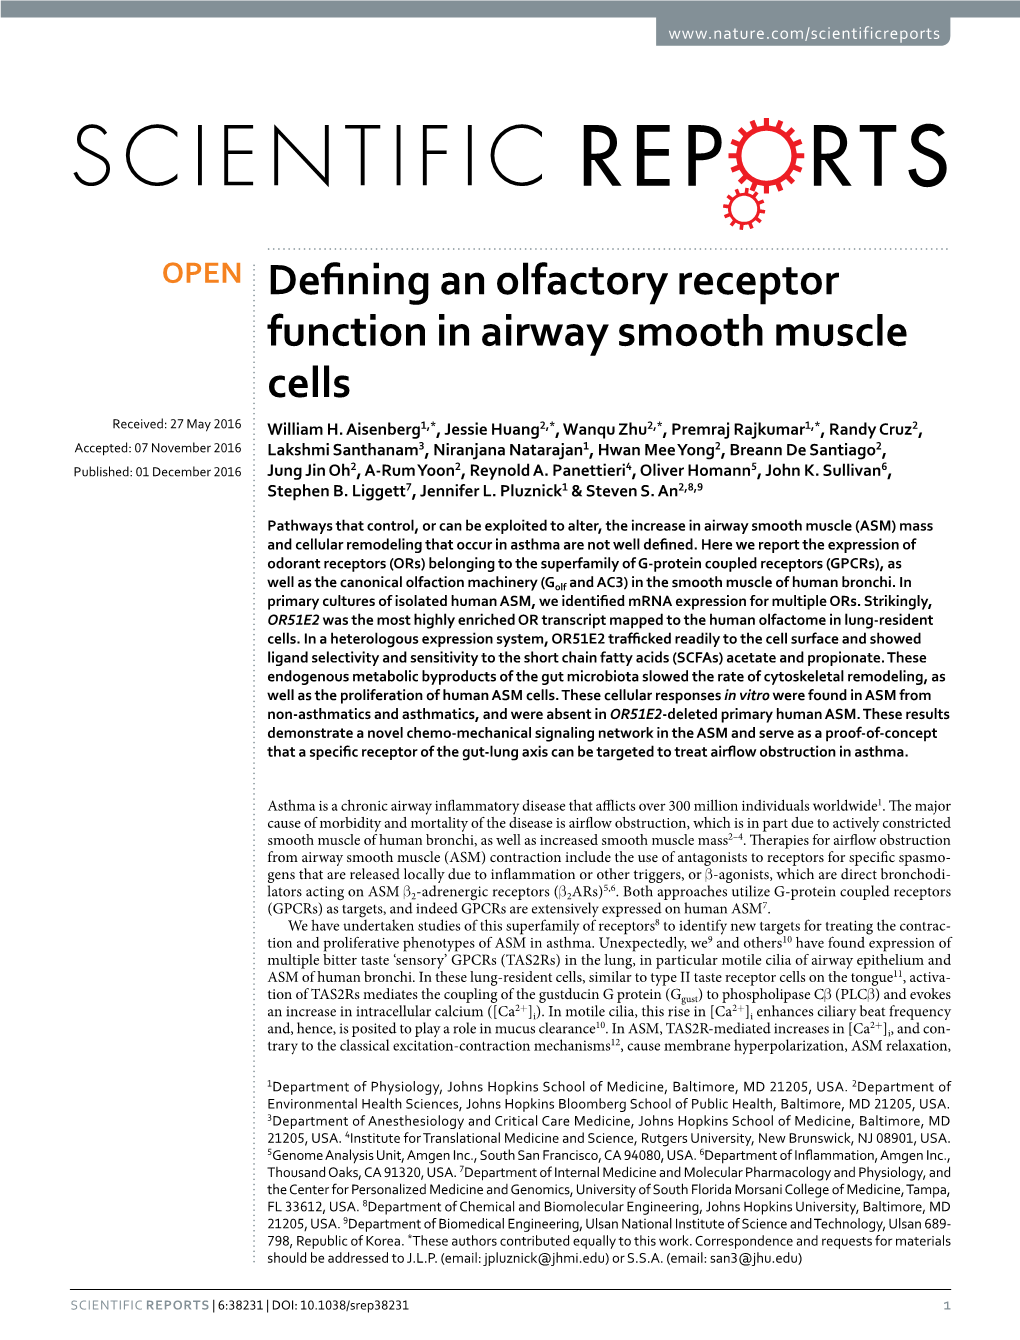 Defining an Olfactory Receptor Function in Airway Smooth Muscle Cells Received: 27 May 2016 William H